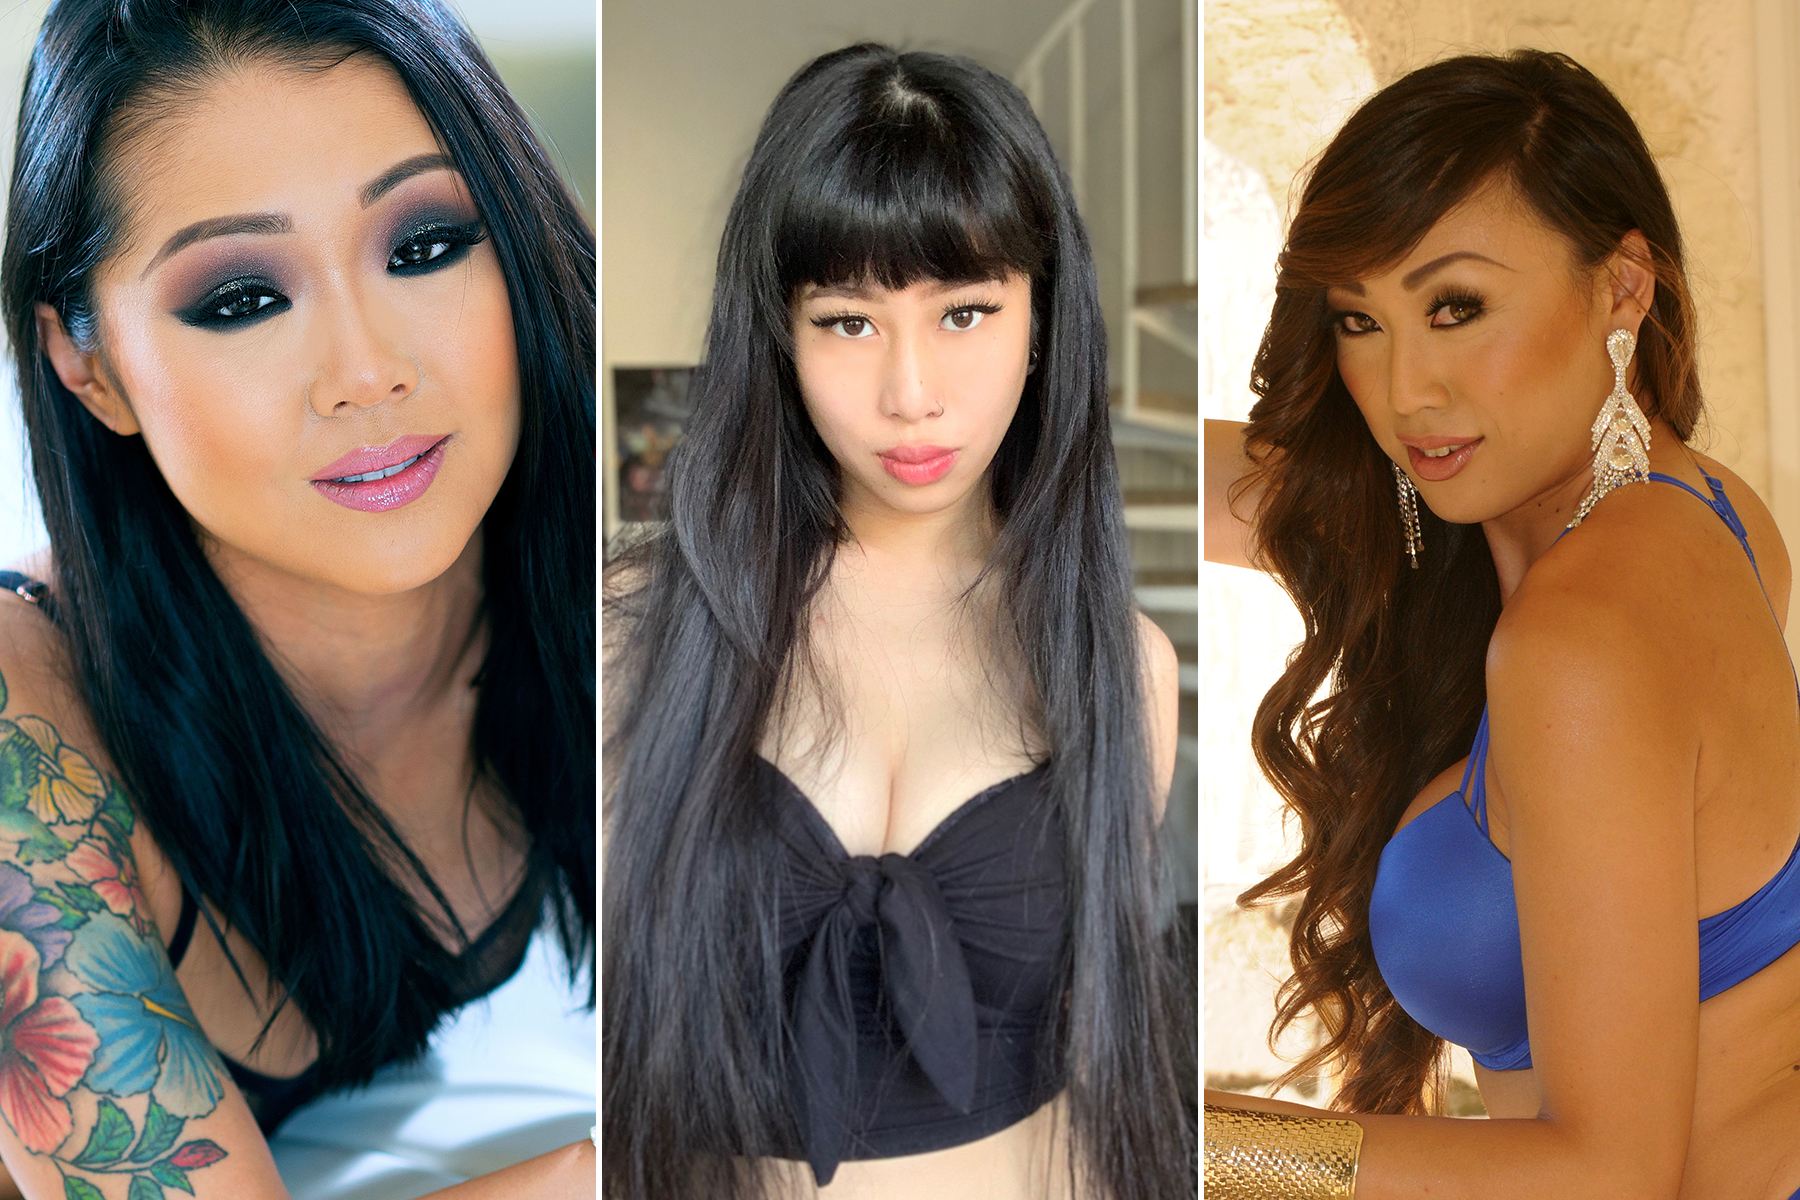 Asian Women Porn - Asian Porn Performers Are Sick of Being Fetishised in Racist Roles